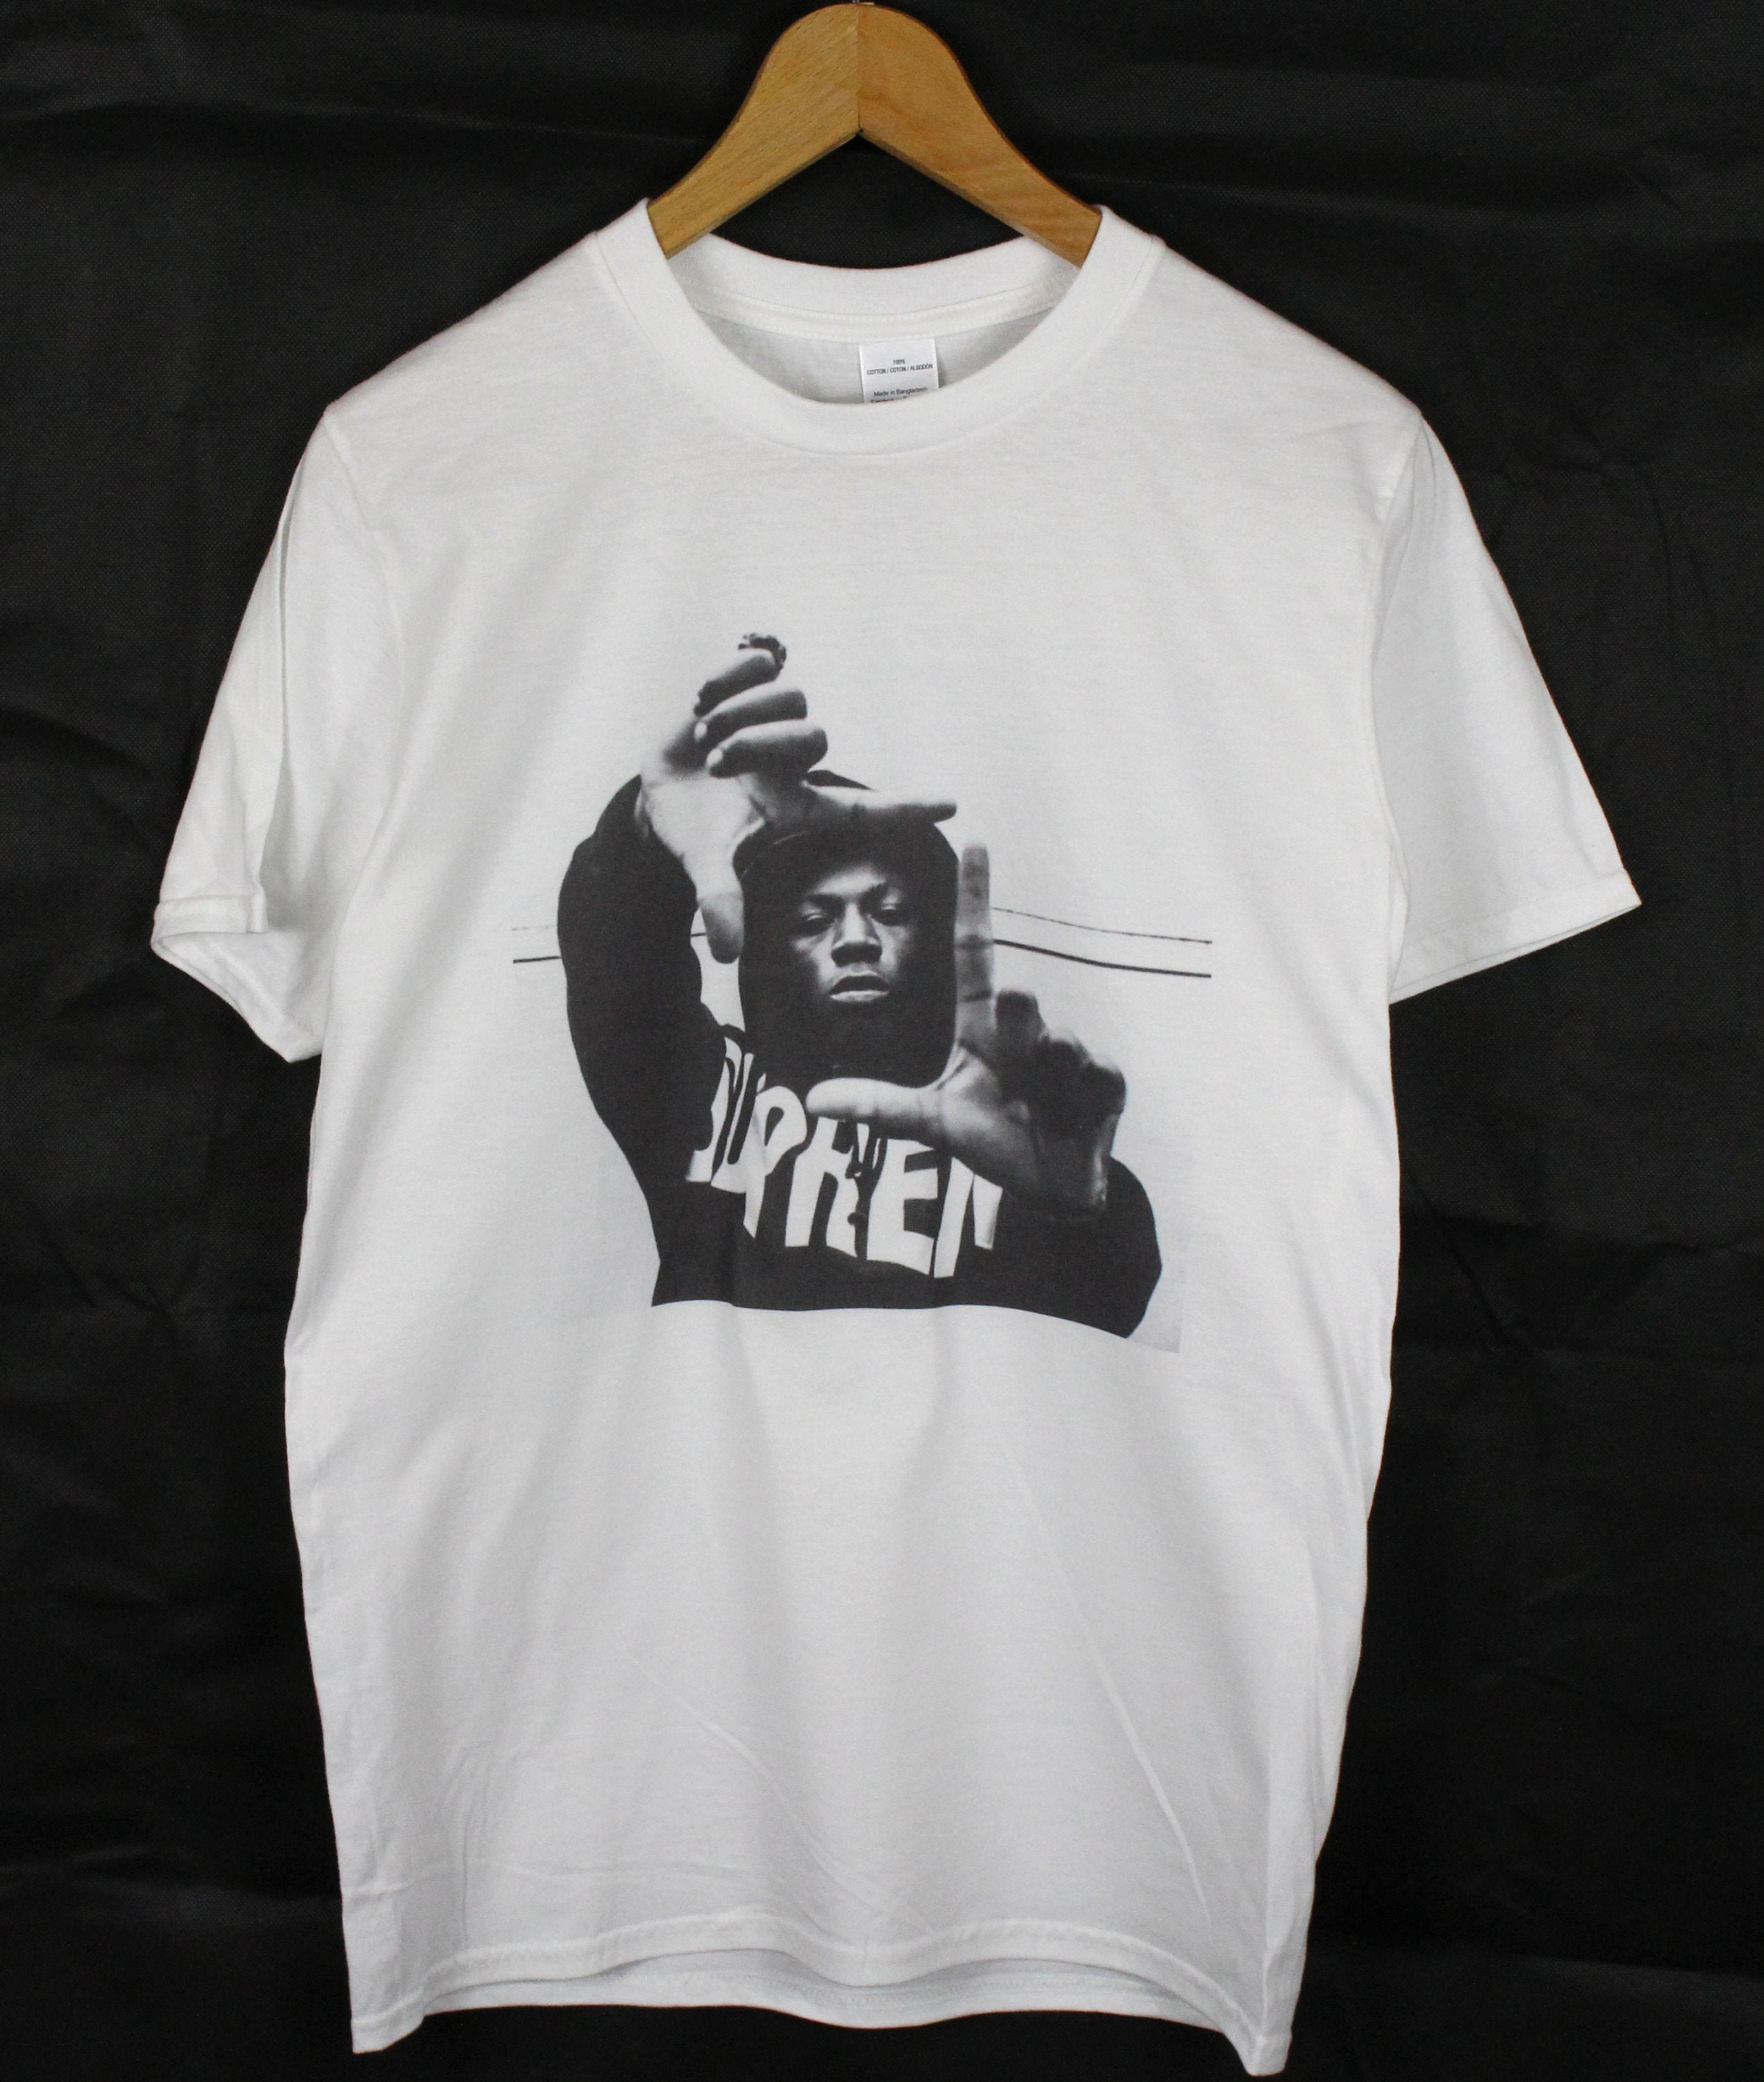 vigtig Frosset Forkæl dig Joey Badass White T-shirt Sizes Available S-3XL - Etsy